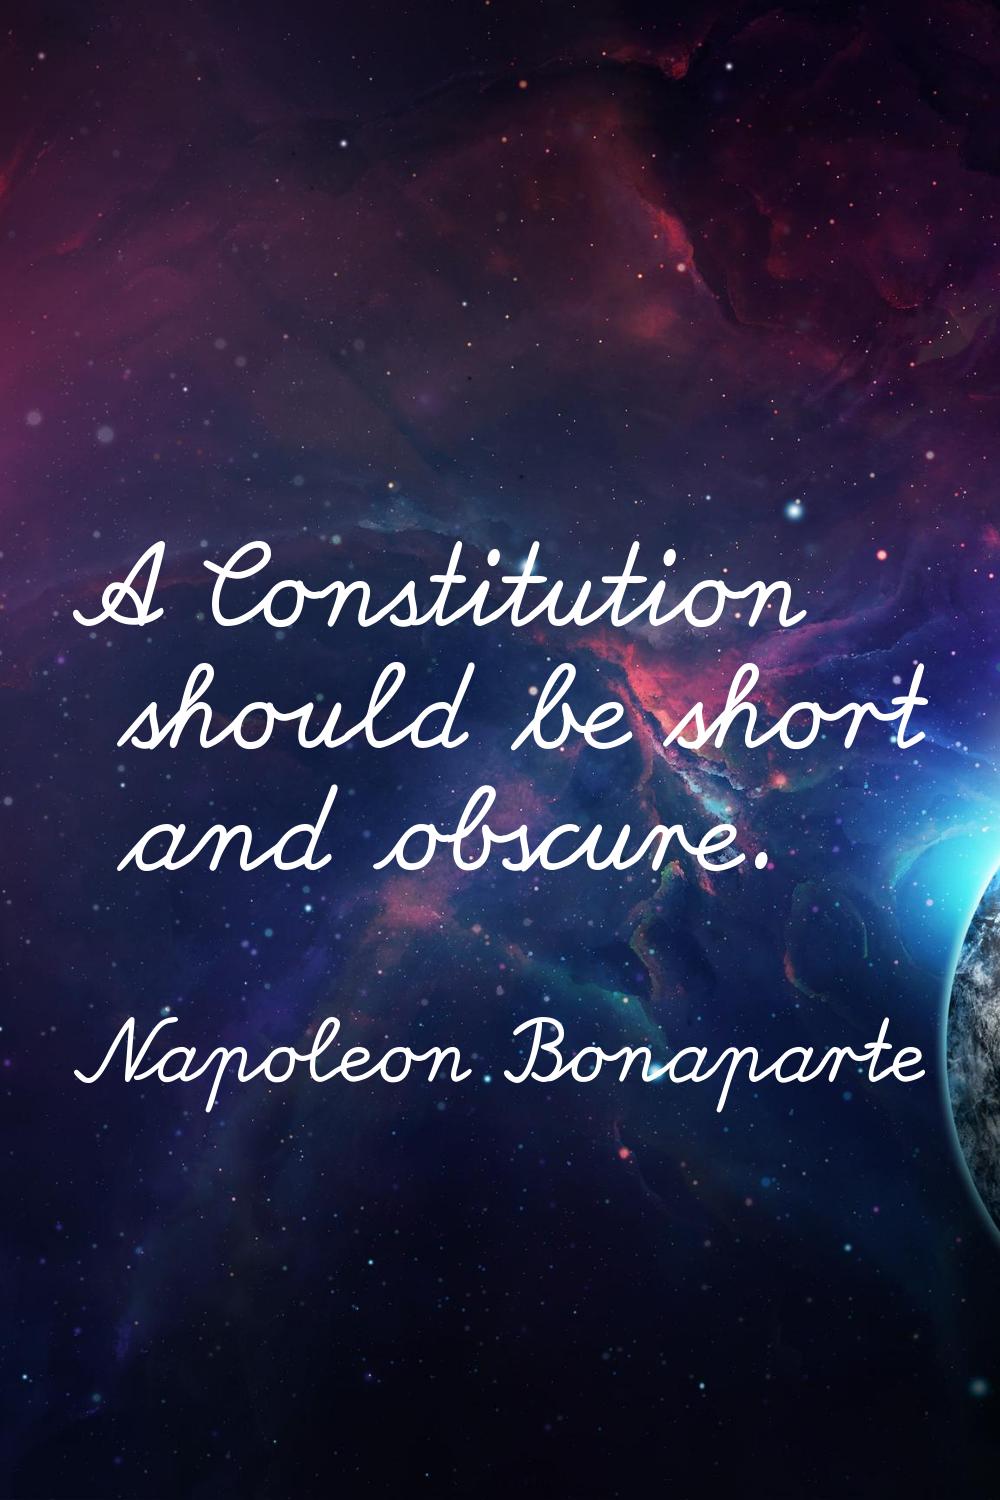 A Constitution should be short and obscure.